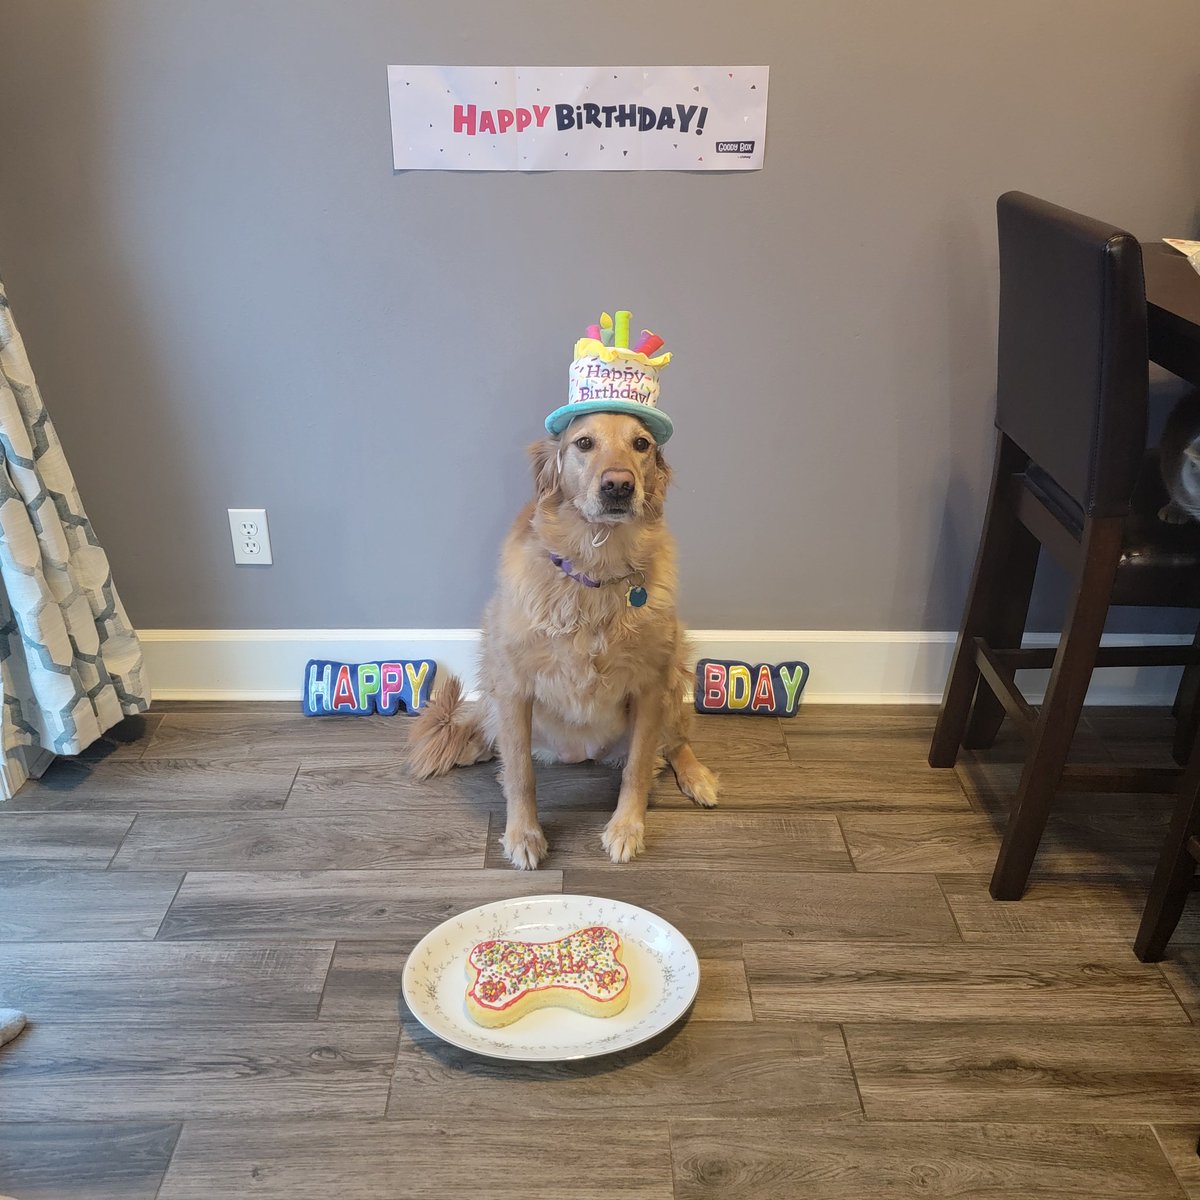 Hi! It was my 7th Birthday yesterday! Here is the pic that Momma took! My cake was good! #Birthdays #Goldens